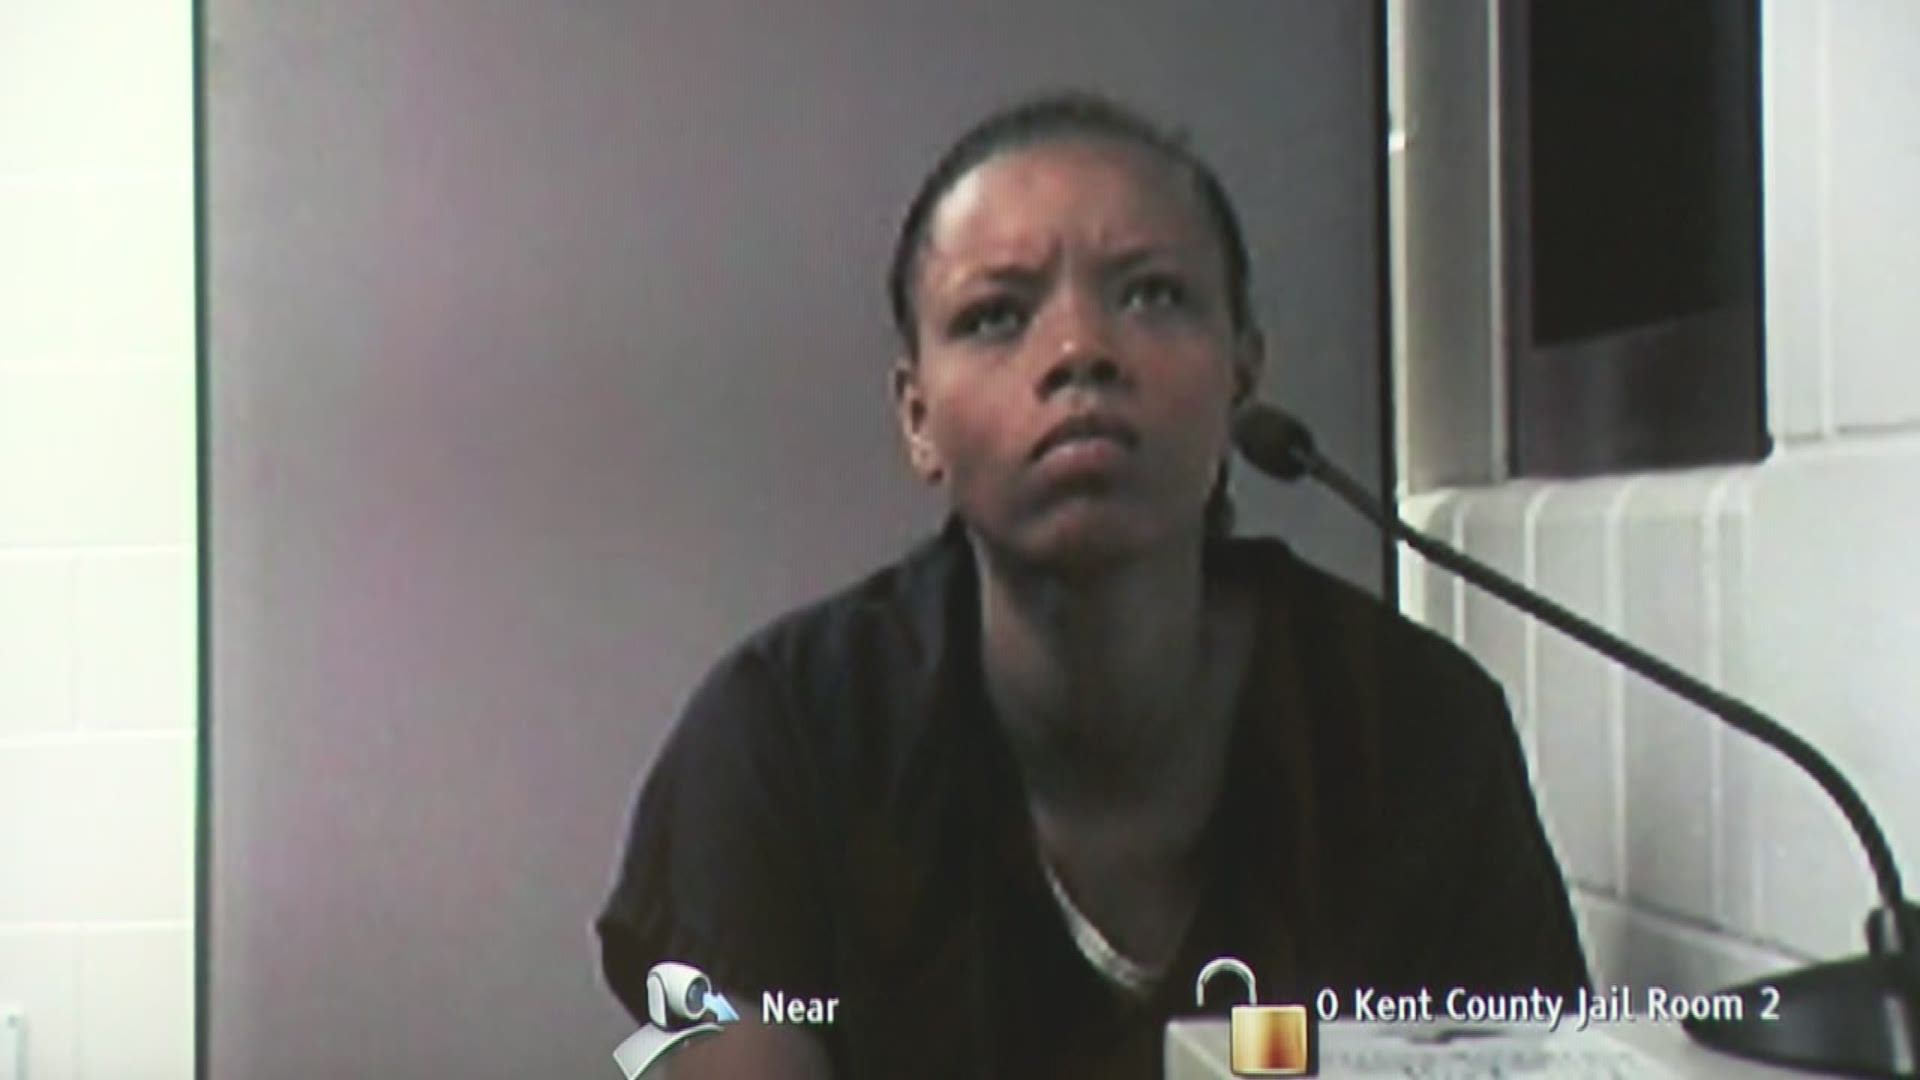 A young mother was arraigned today on two felony charges for the death of her infant son, who went days without food while strapped in a car seat in the woman's Wyoming apartment.